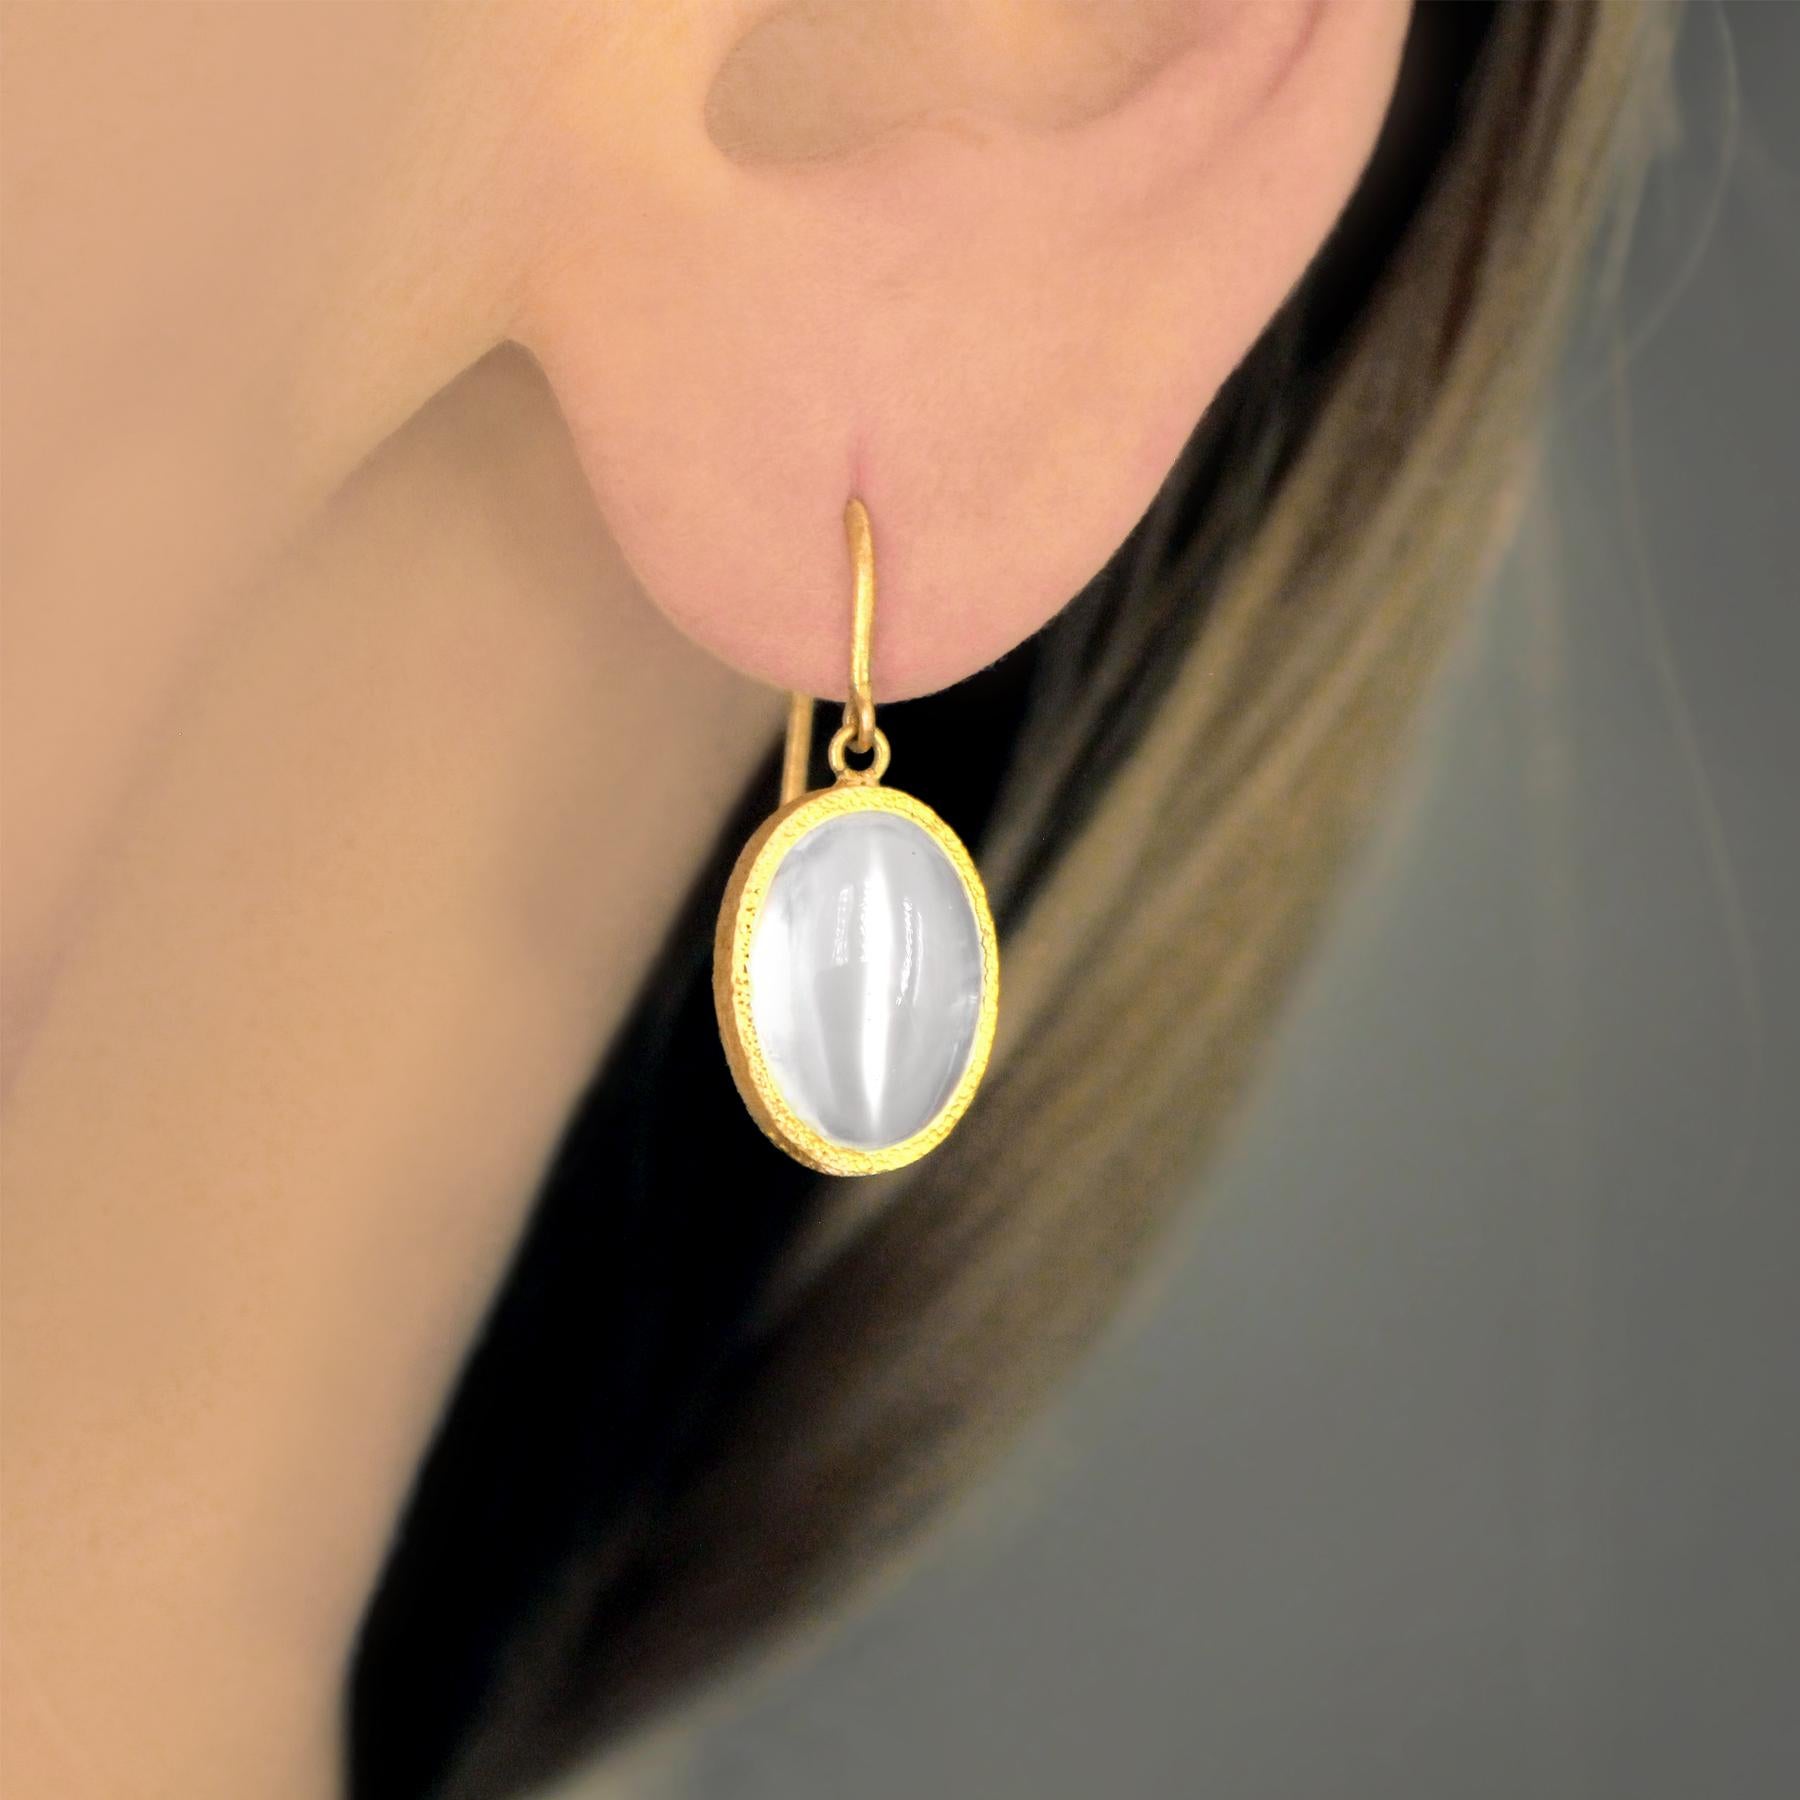 One of a Kind Drop Earrings hand-fabricated by jewelry maker Devta Doolan in signature-finished 22k yellow gold showcasing a spectacular matched pair of oval, cabochon-cut silver cat's-eye moonstones with strong adularescence. Stamped 22k with the